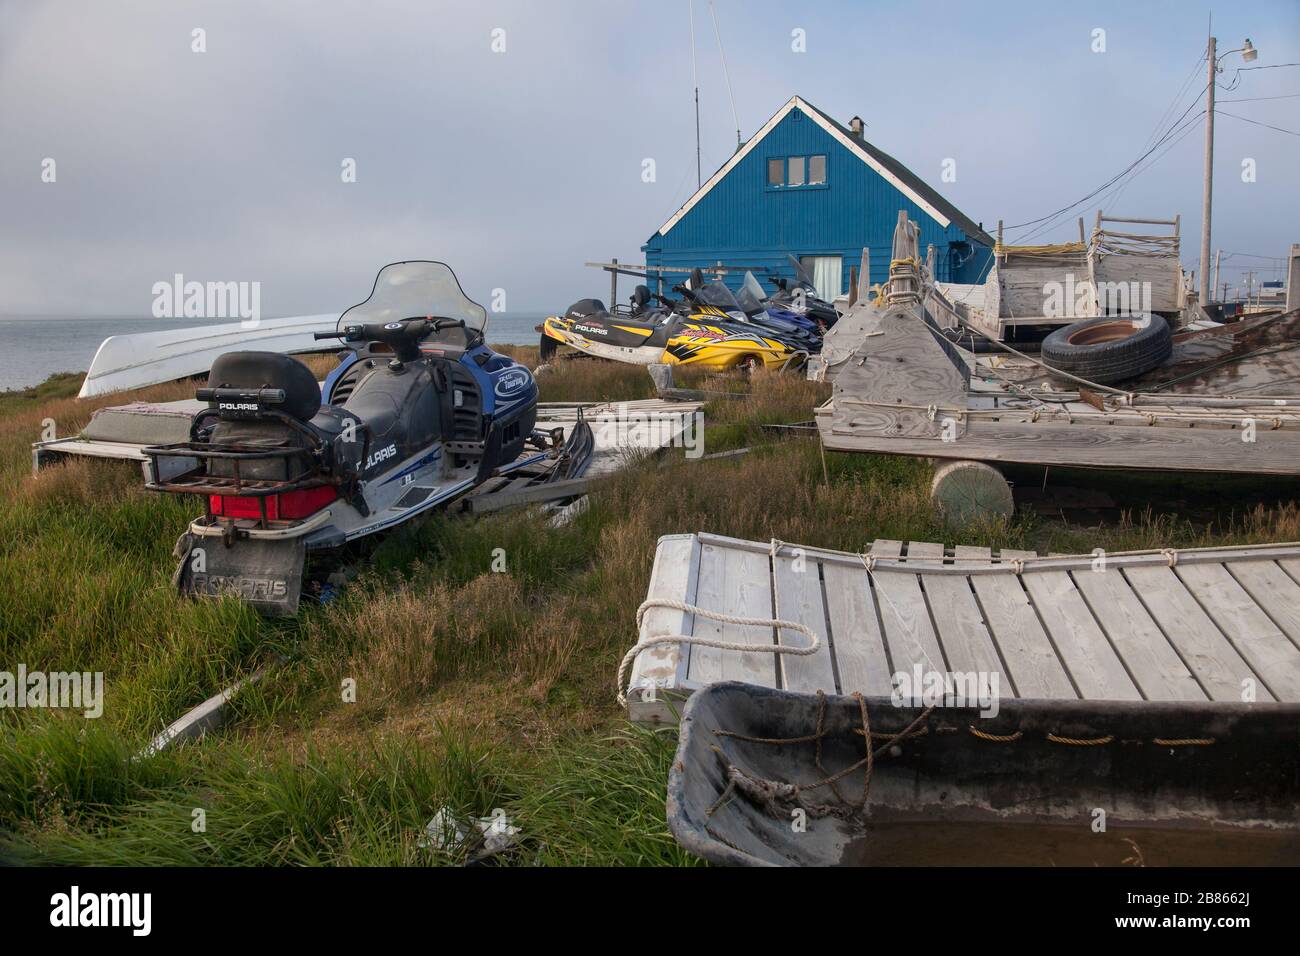 Inuit house close to the Artic Ocean seashore surrounded by jet-skies, sleighs and a boat, Barrow, Alaska Stock Photo